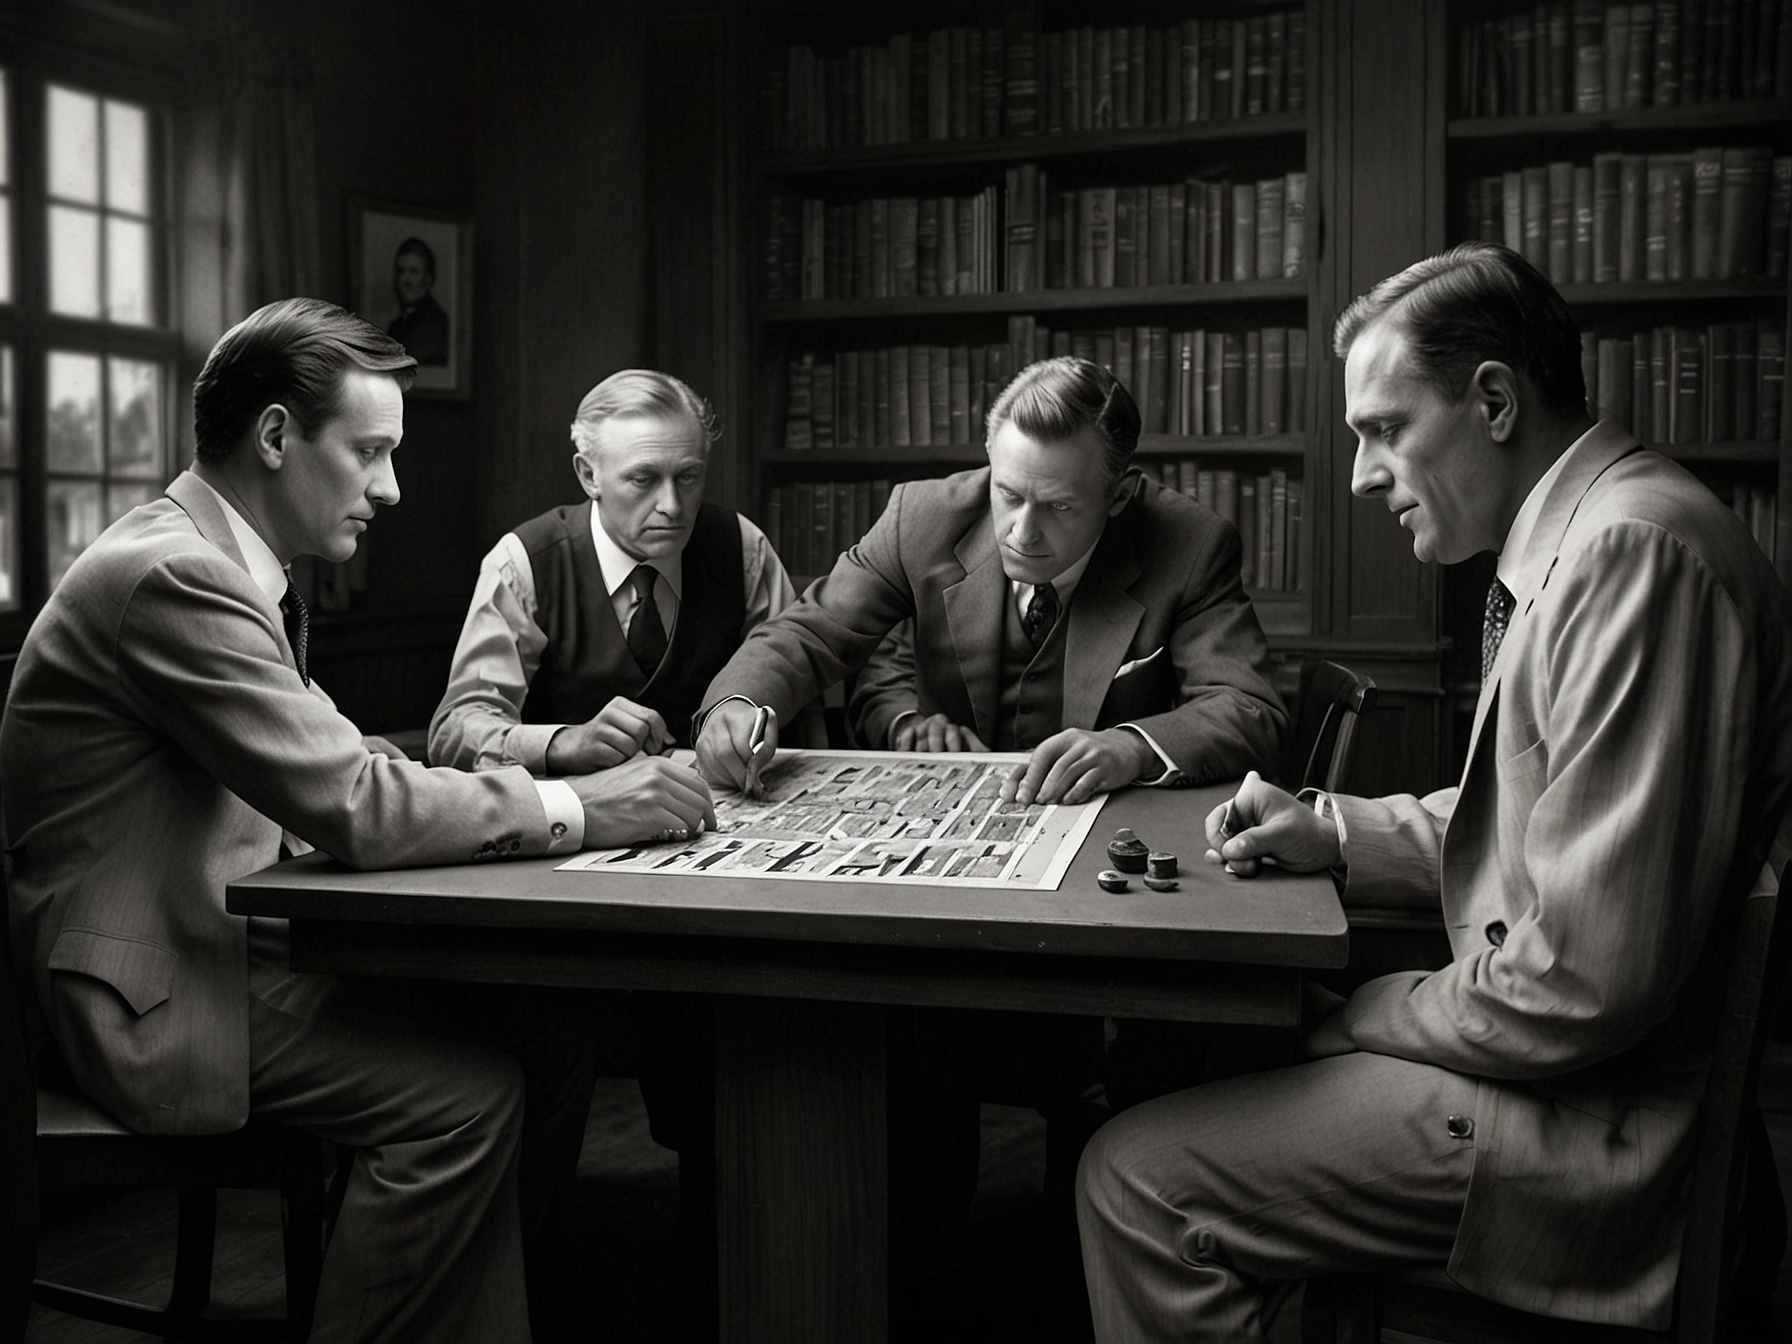 An illustration of players enjoying the NYT Strands word game, intensely focusing on a set of seven letters provided for game #106 to form various words including the spangram.